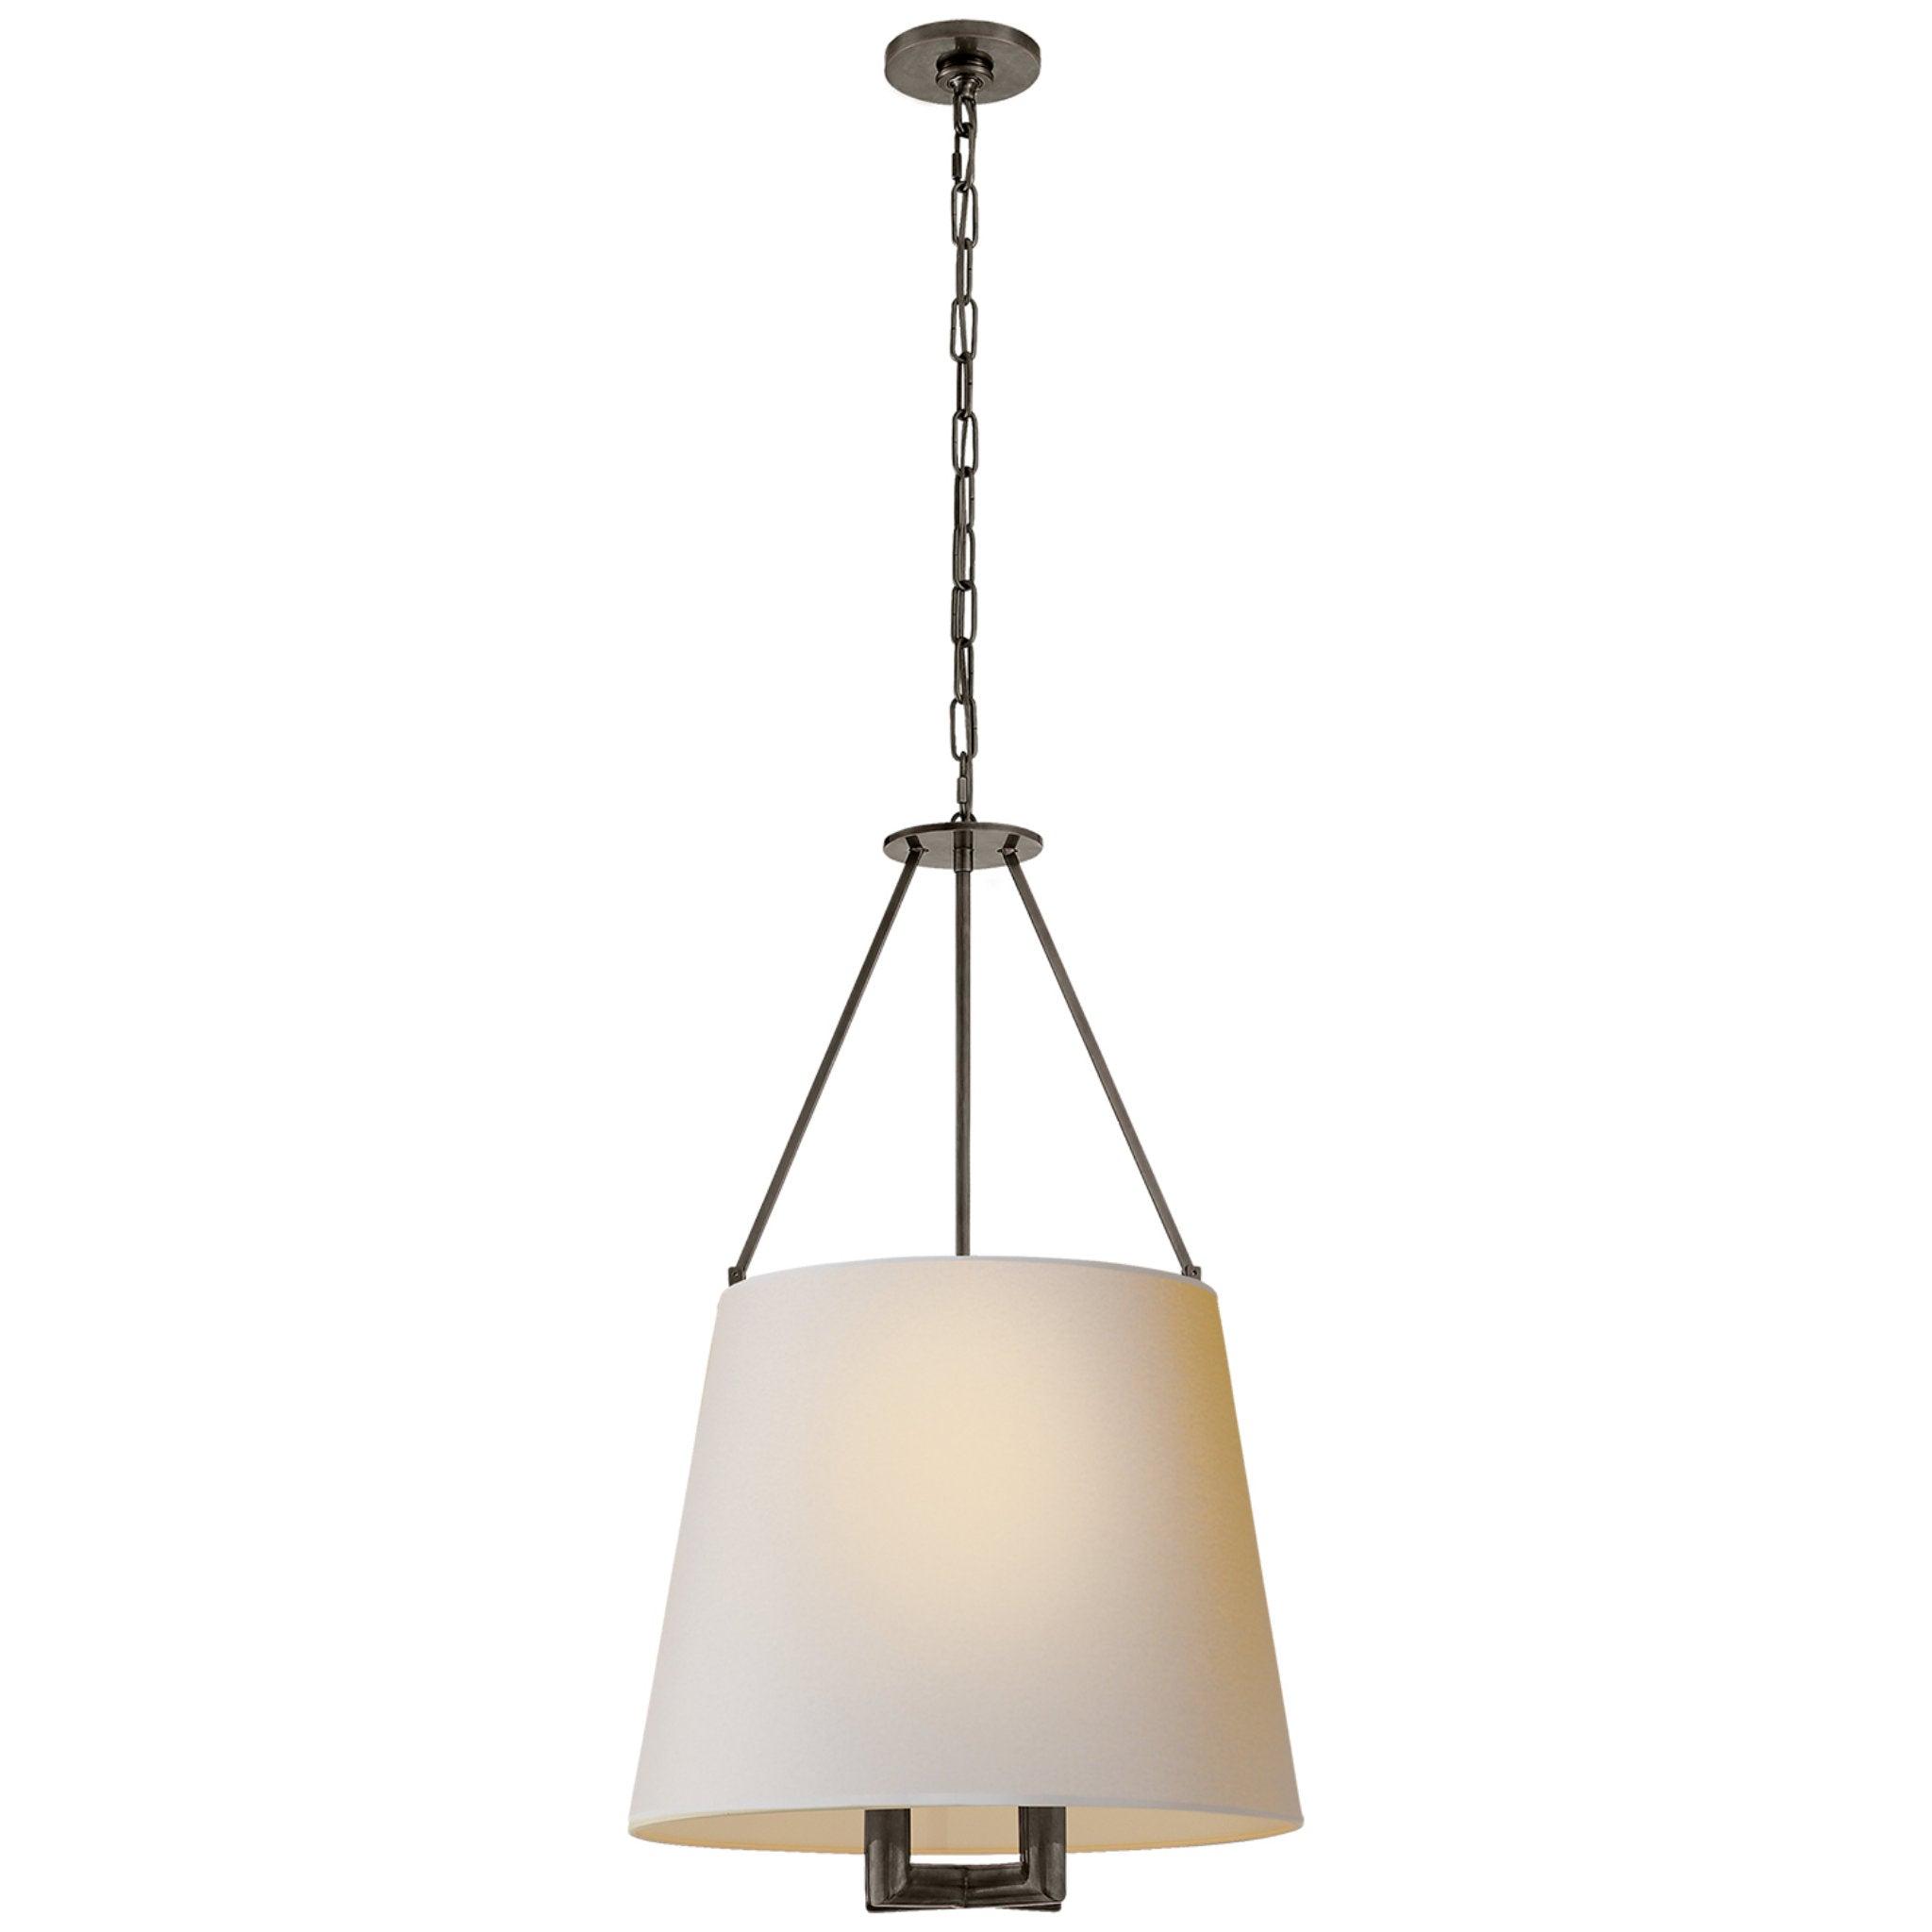 J. Randall Powers Dalston Hanging Shade in Bronze with Natural Paper Shade